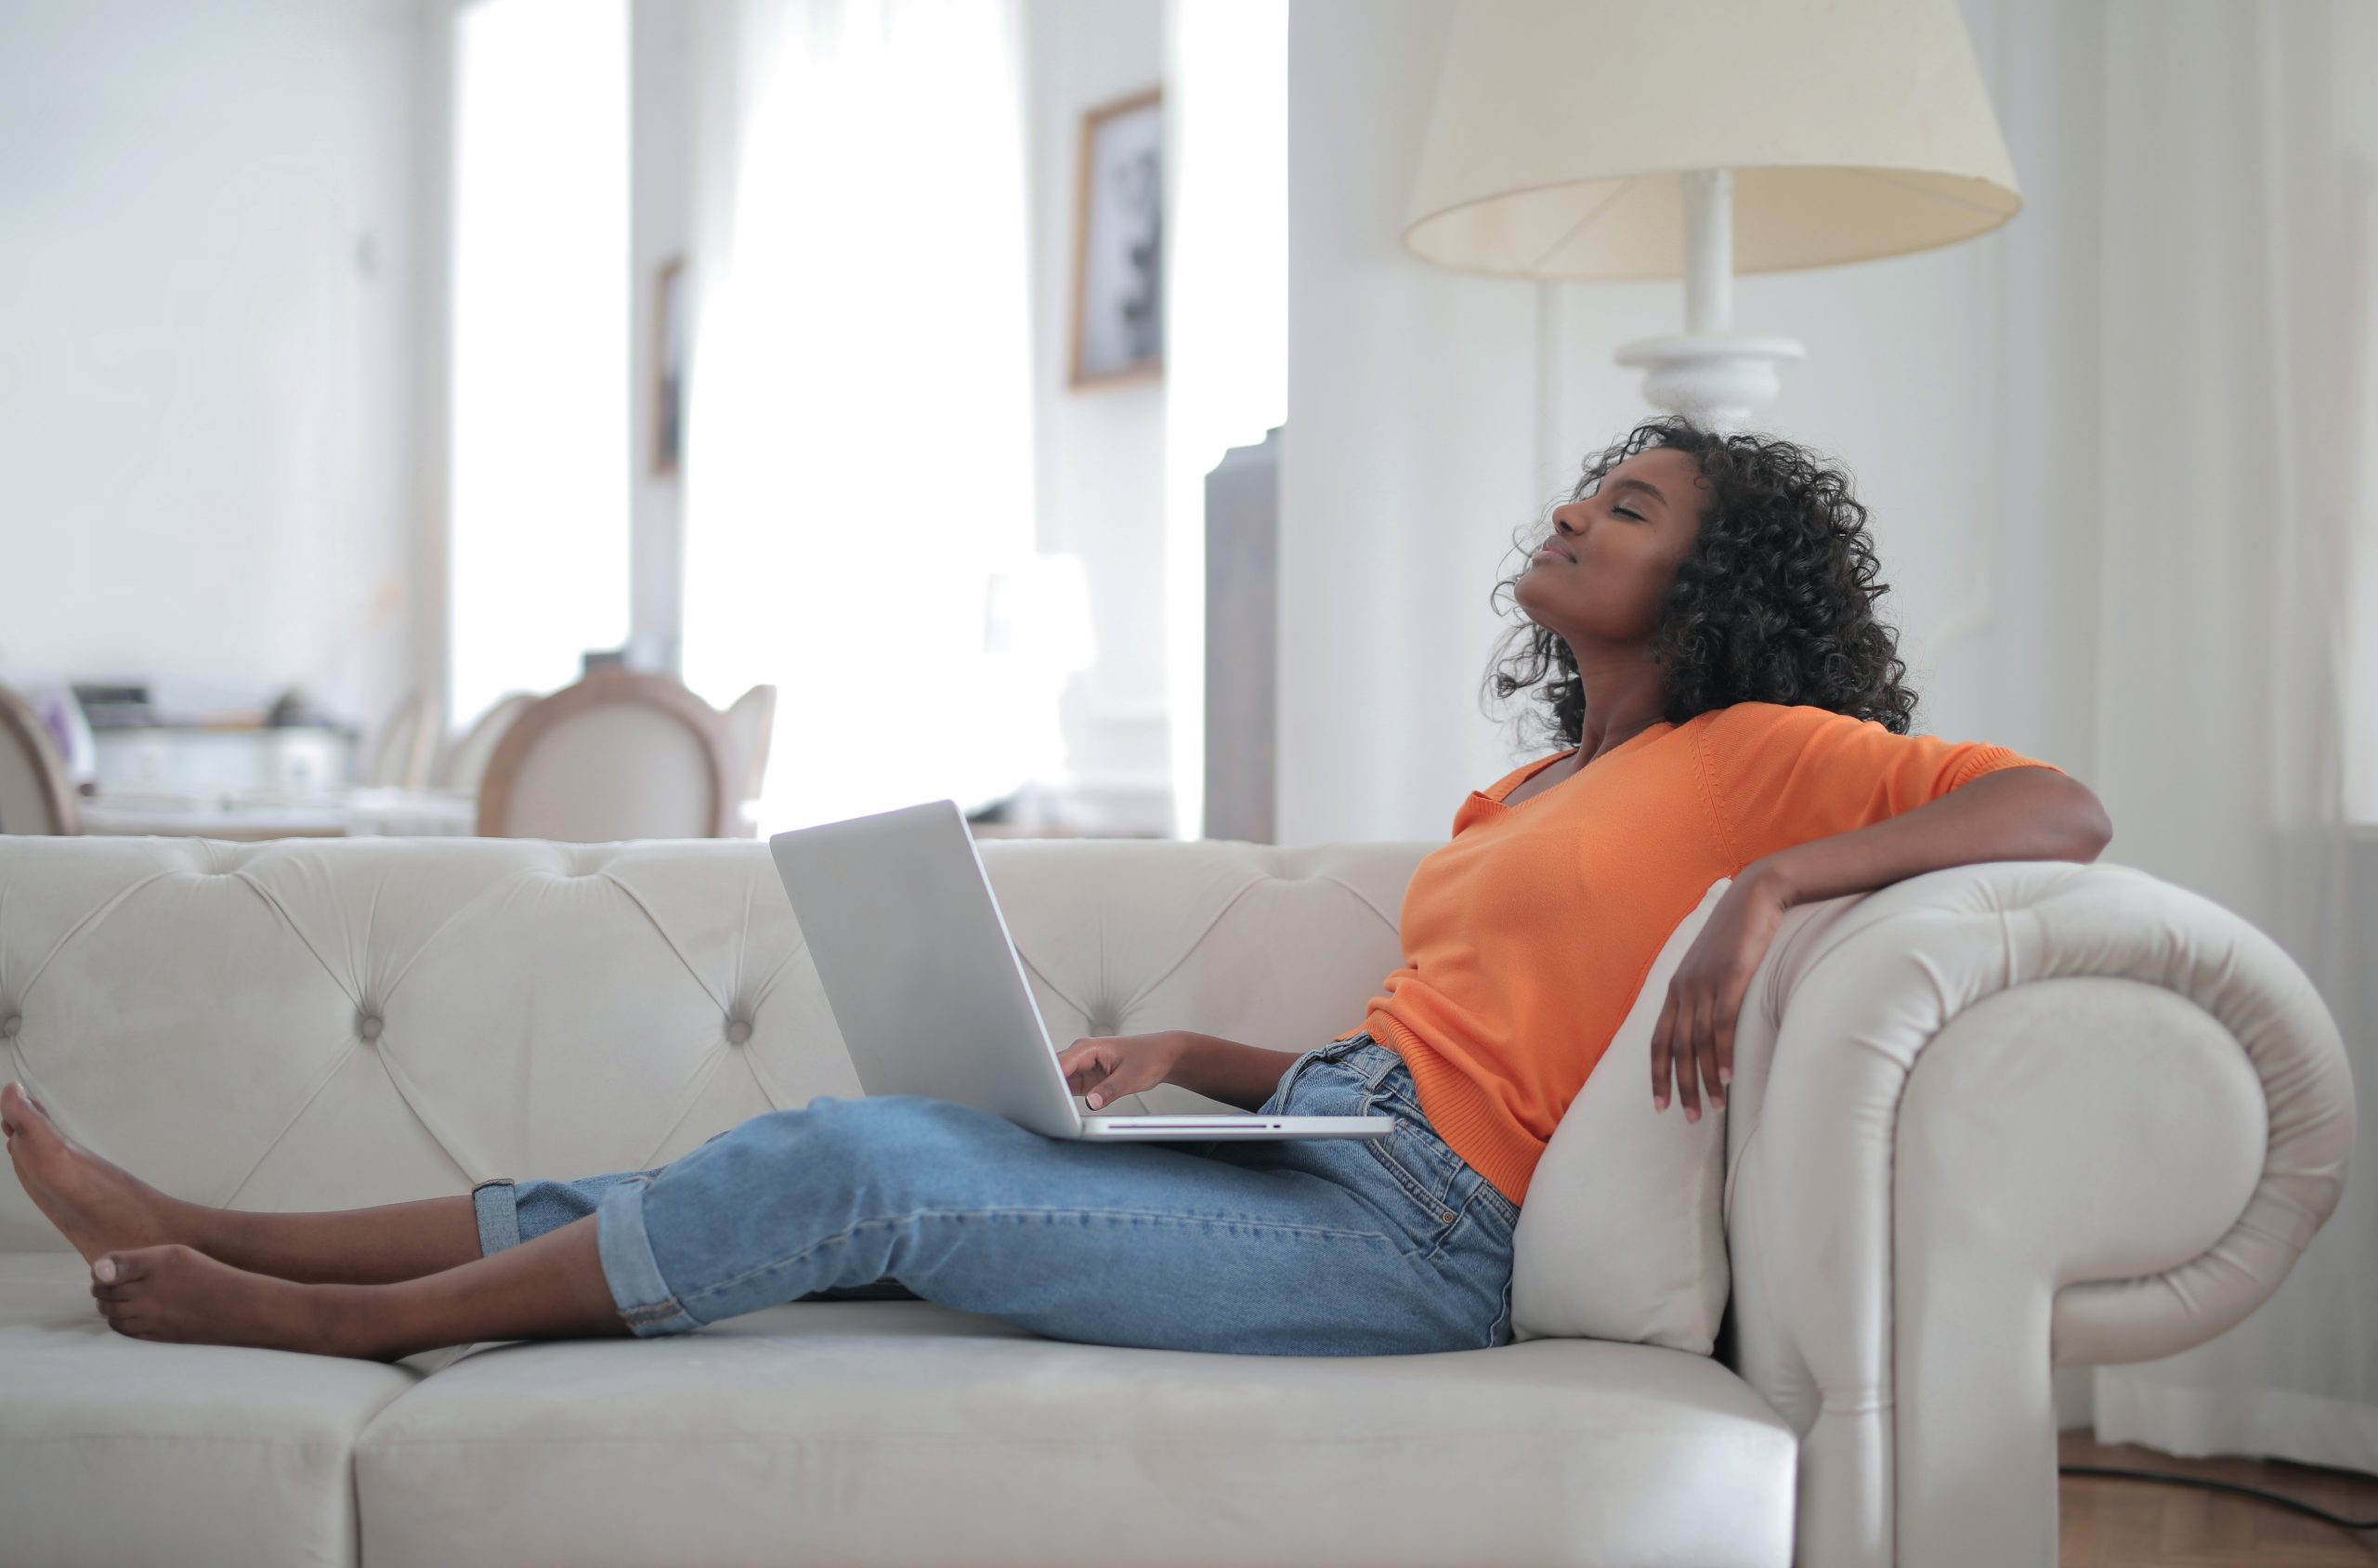 a woman sitting on a sofa holding a laptop